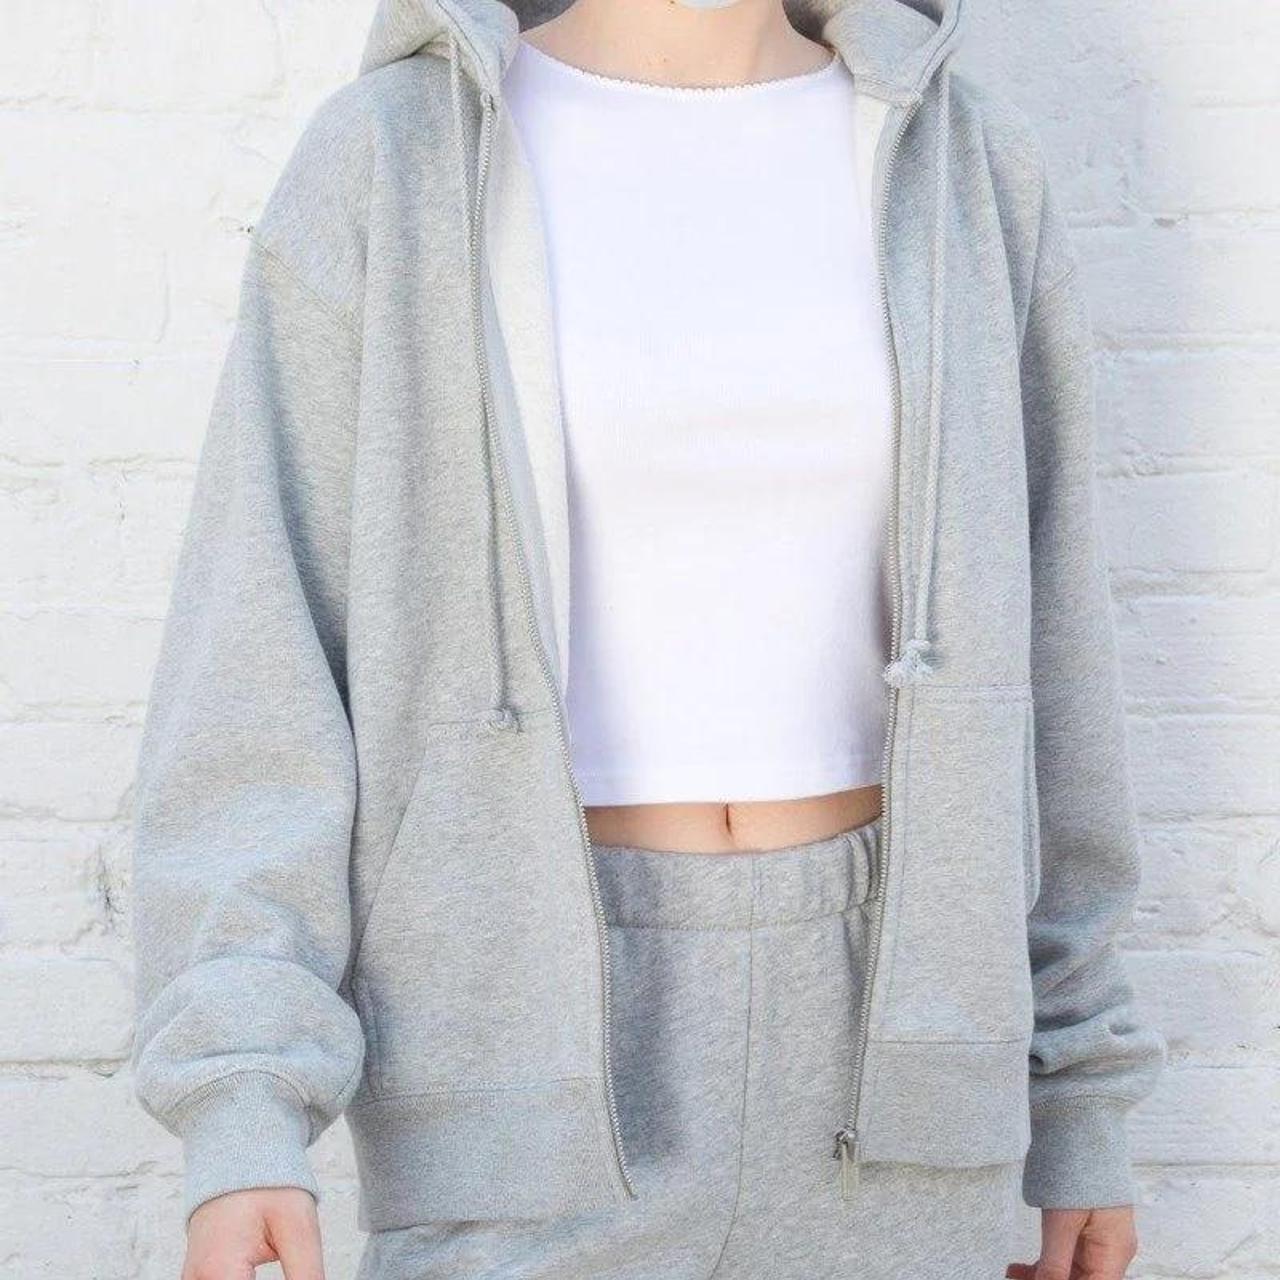 BRANDY MELVILLE HOODIE COLLECTION 